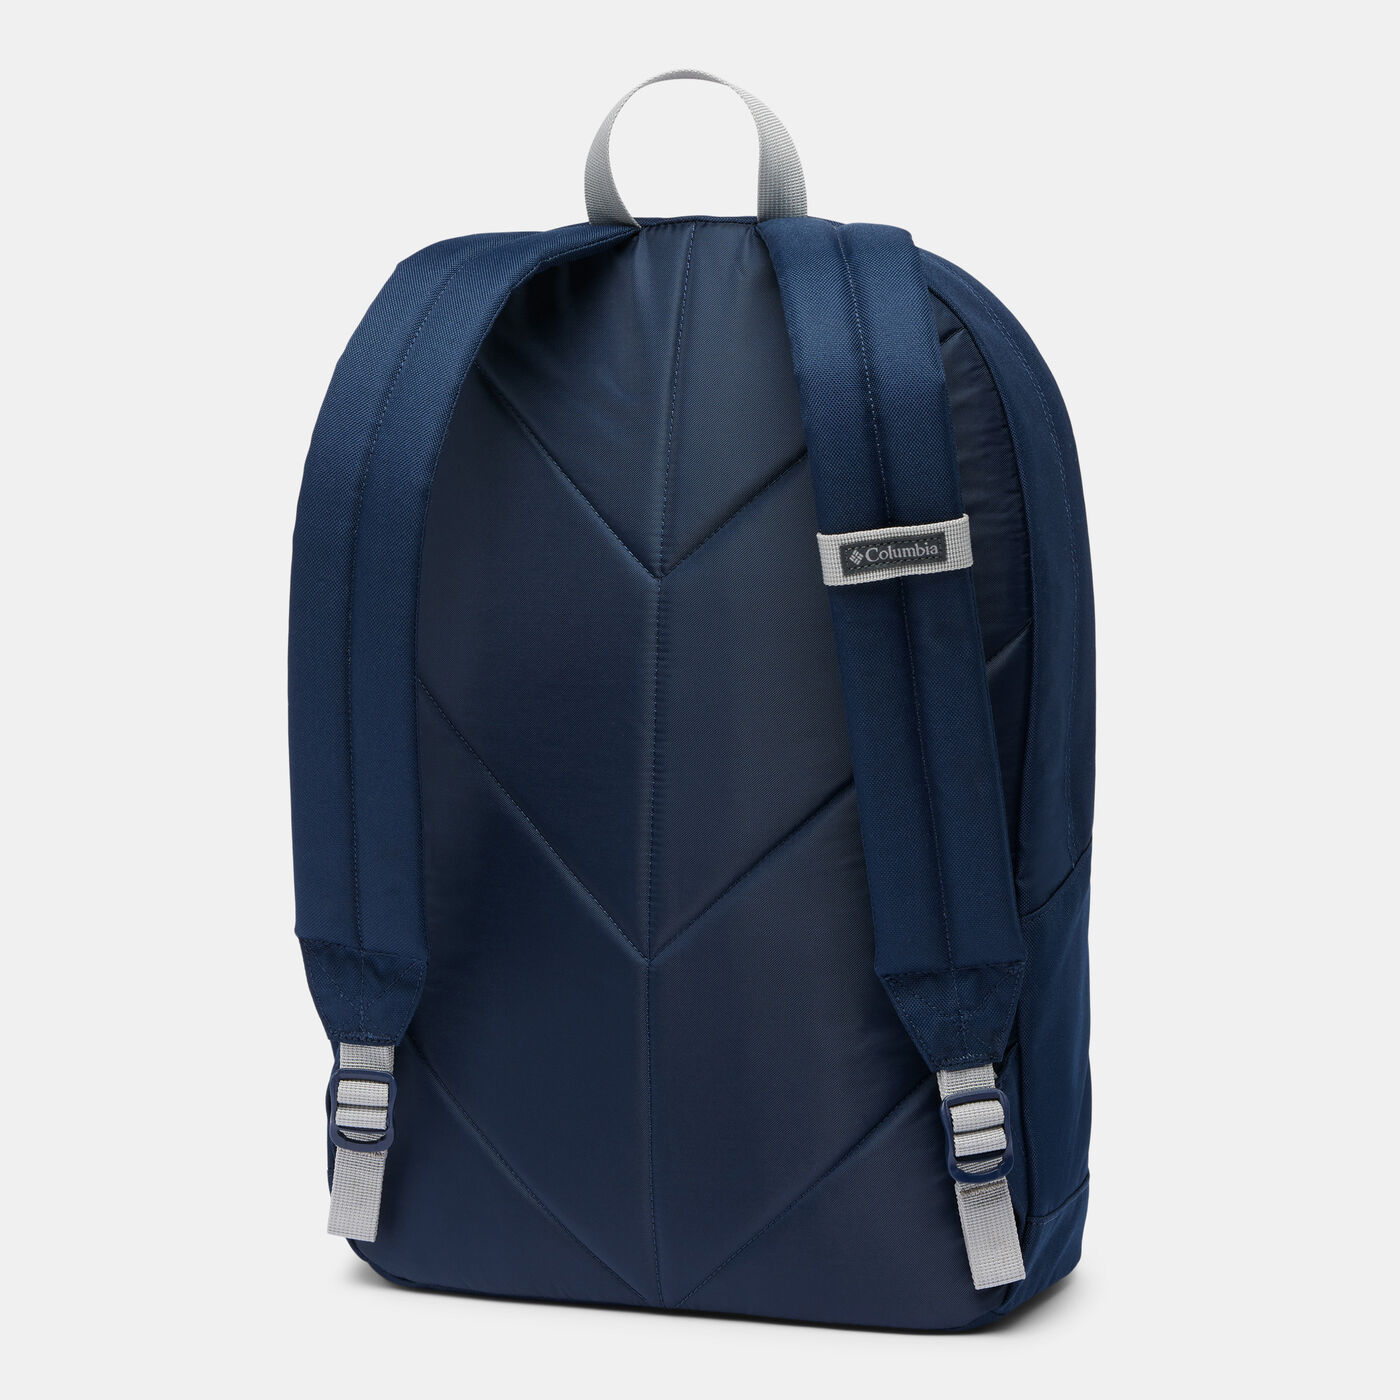 Zigzag™ 22L Backpack